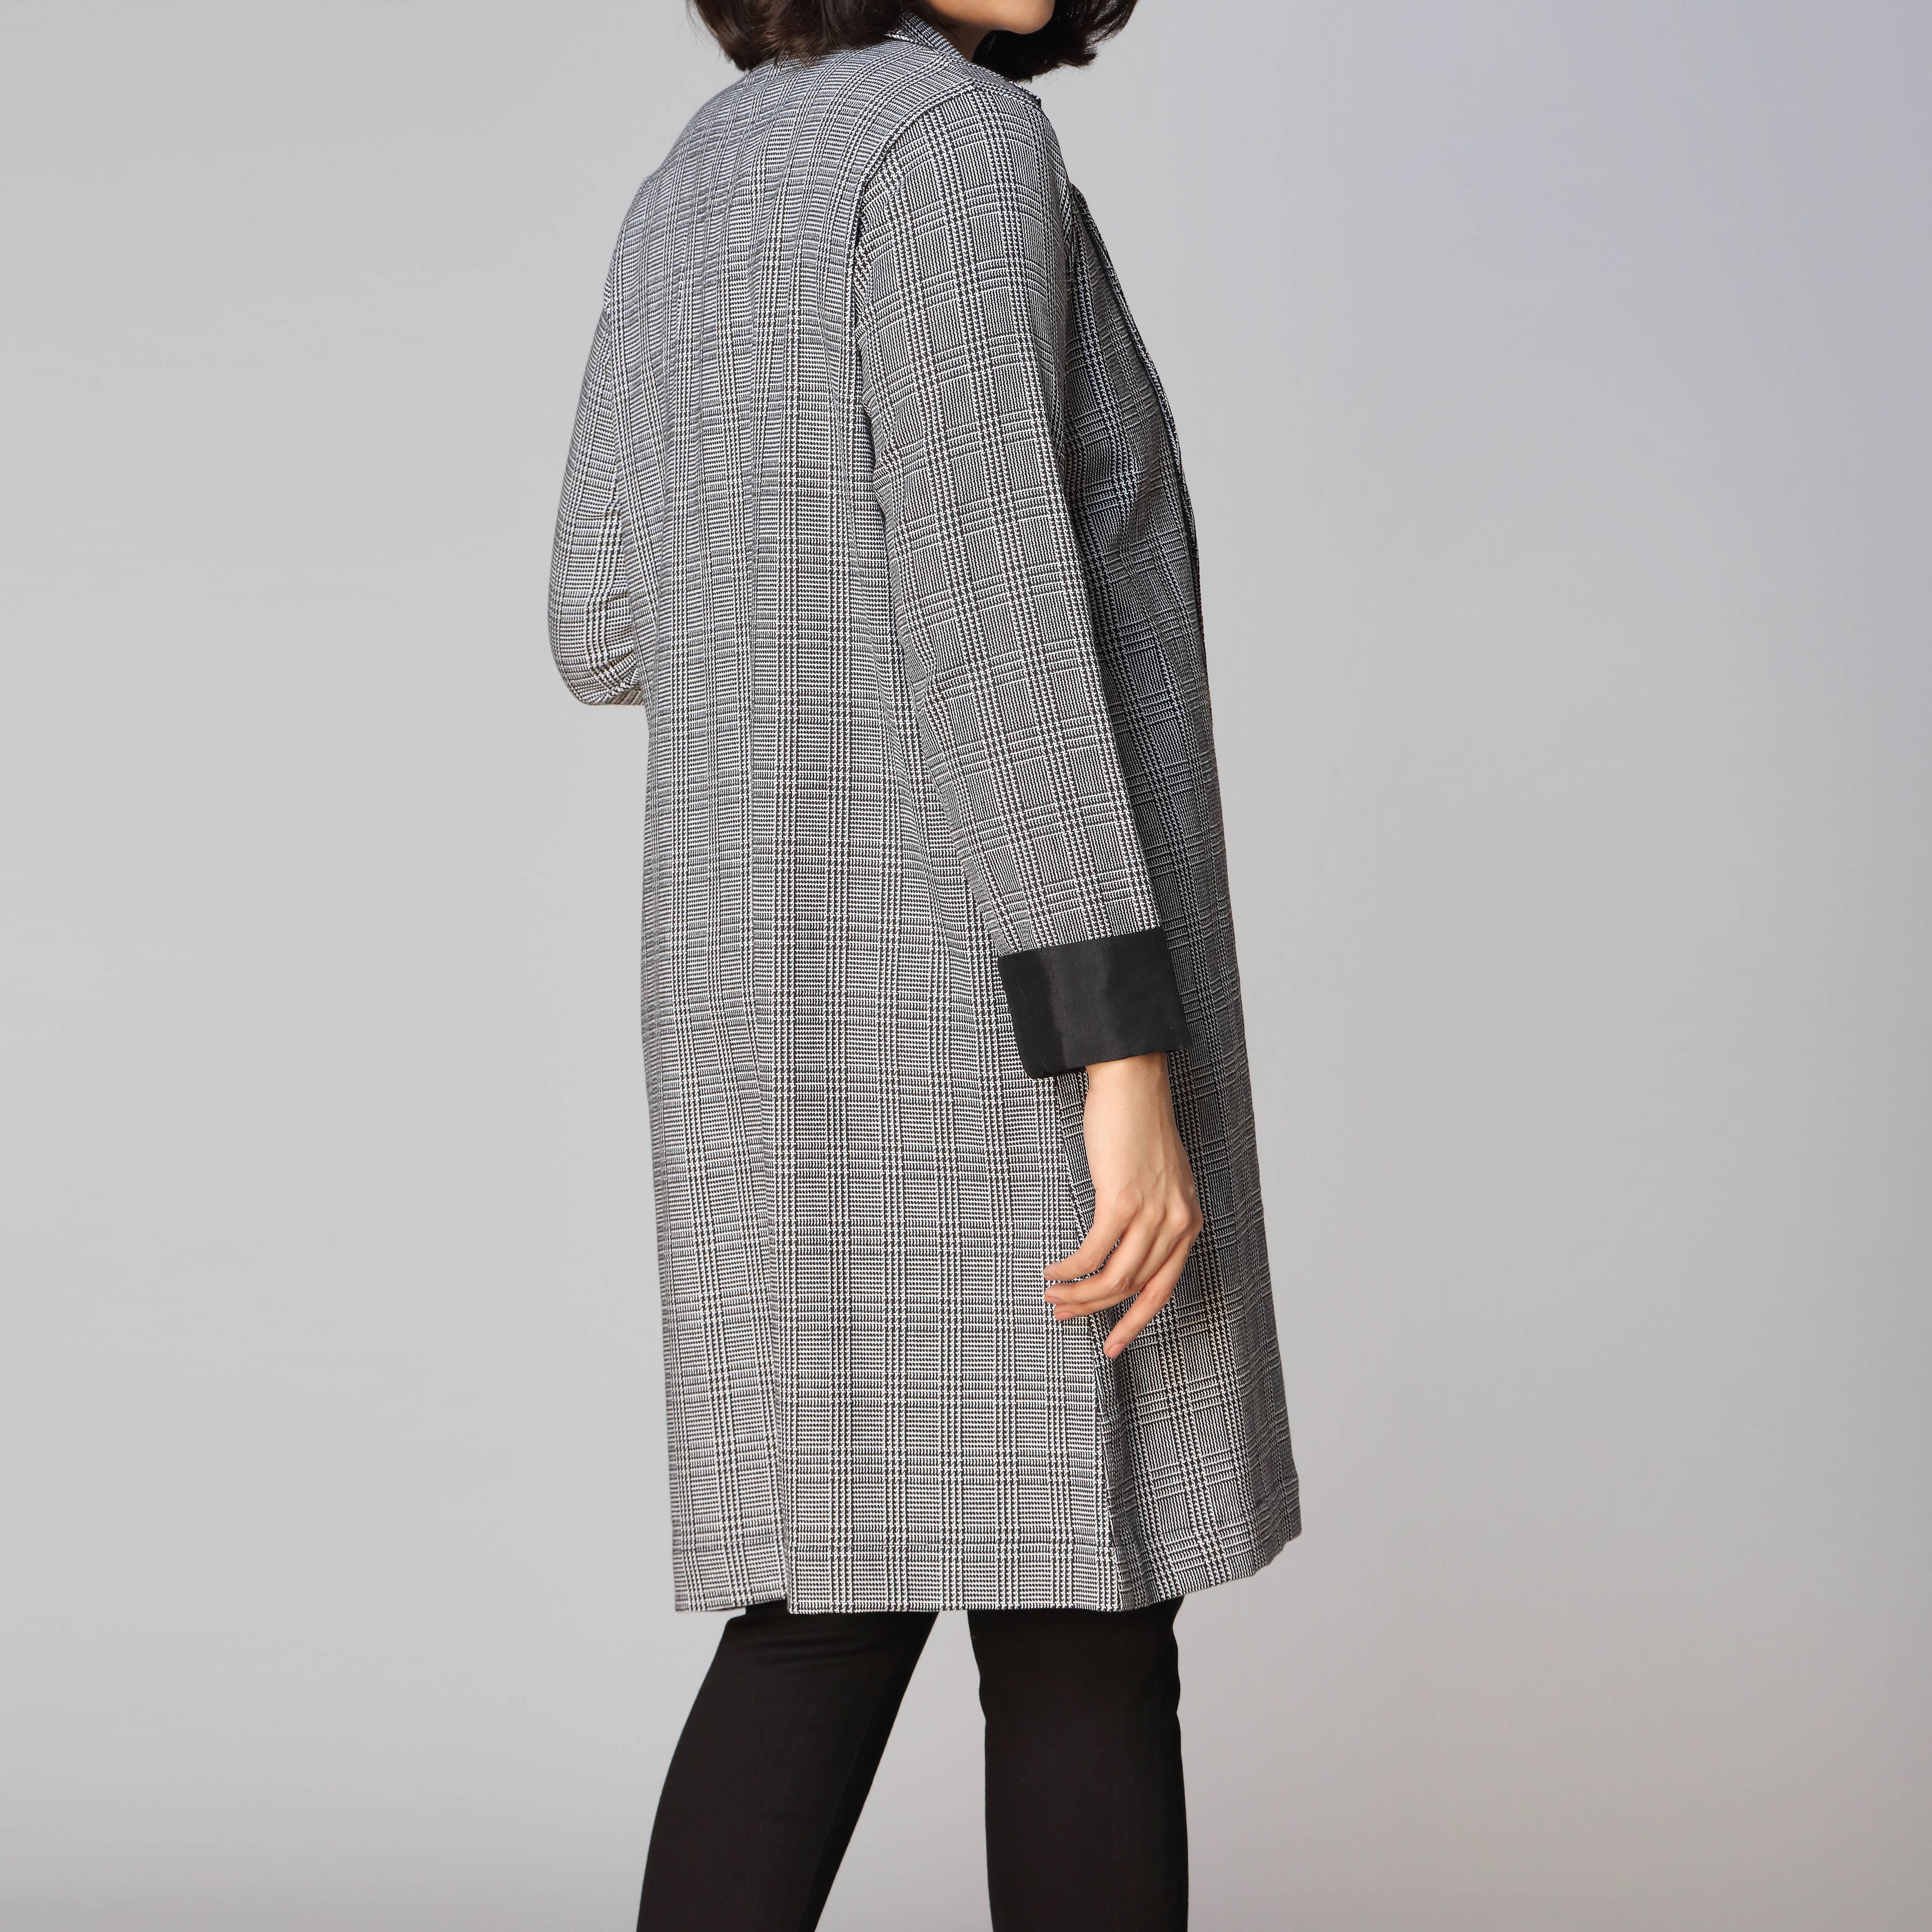 1PC- Flannel Checkered Coat  PW2325